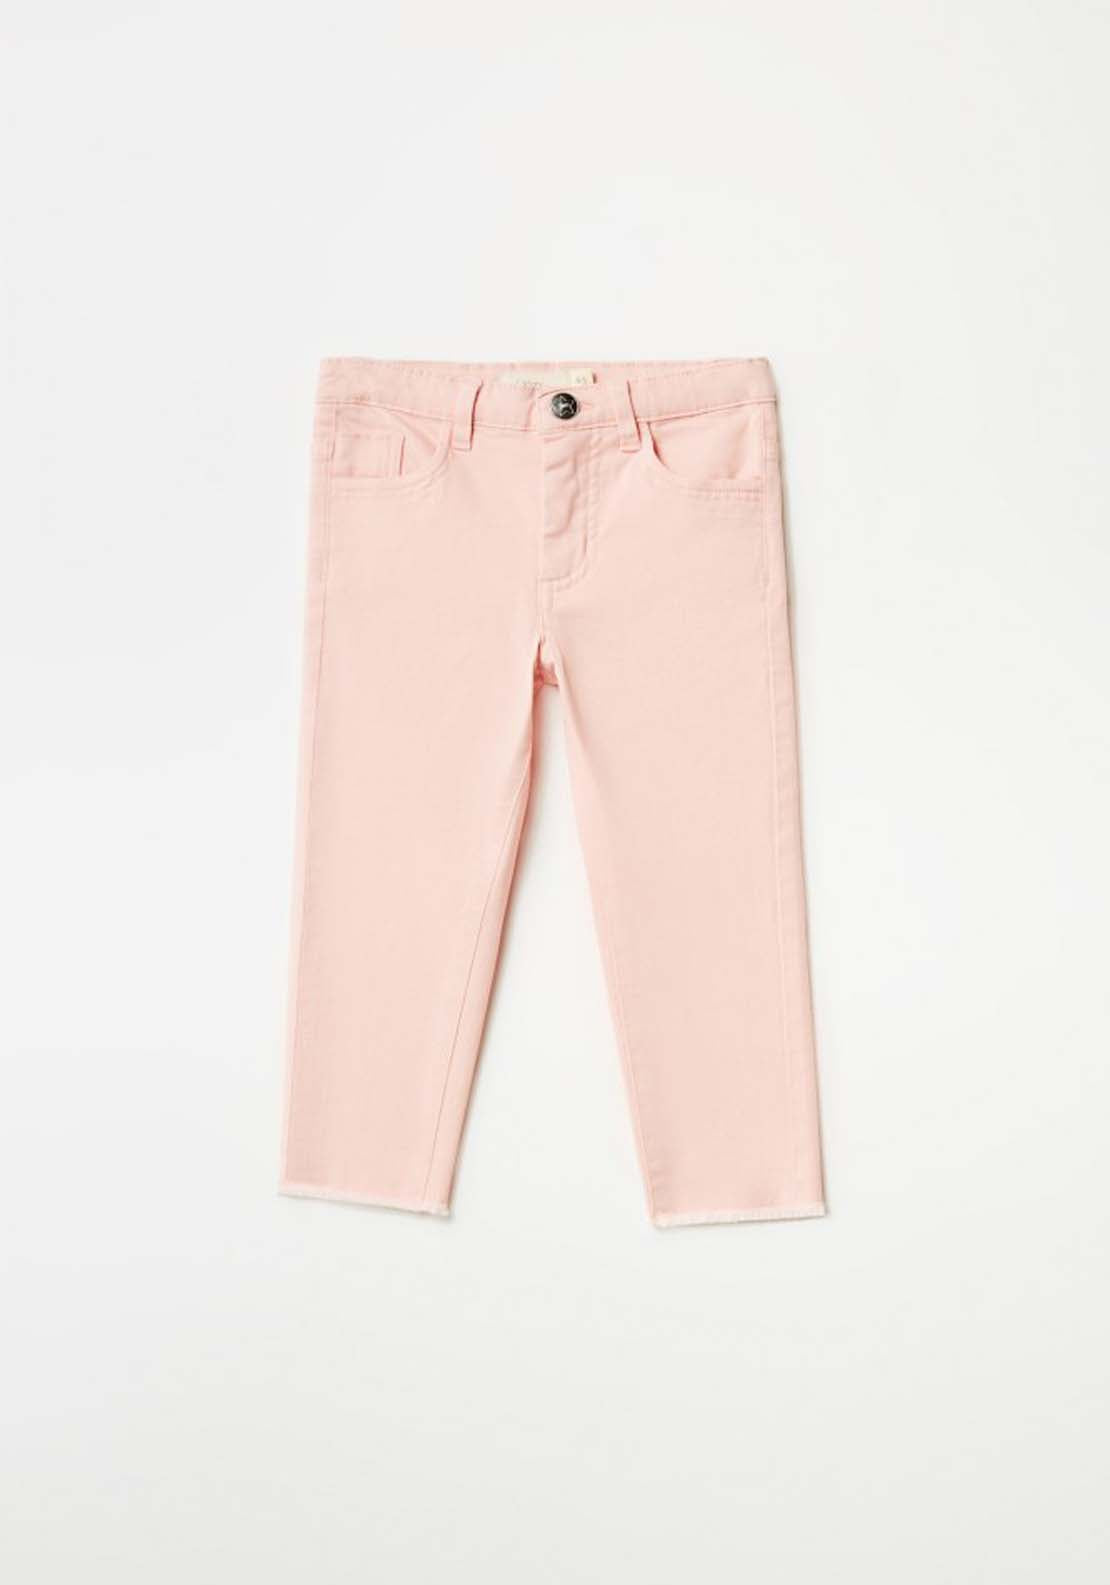 Sfera Pink Plain Twill Jeans - Pink 1 Shaws Department Stores